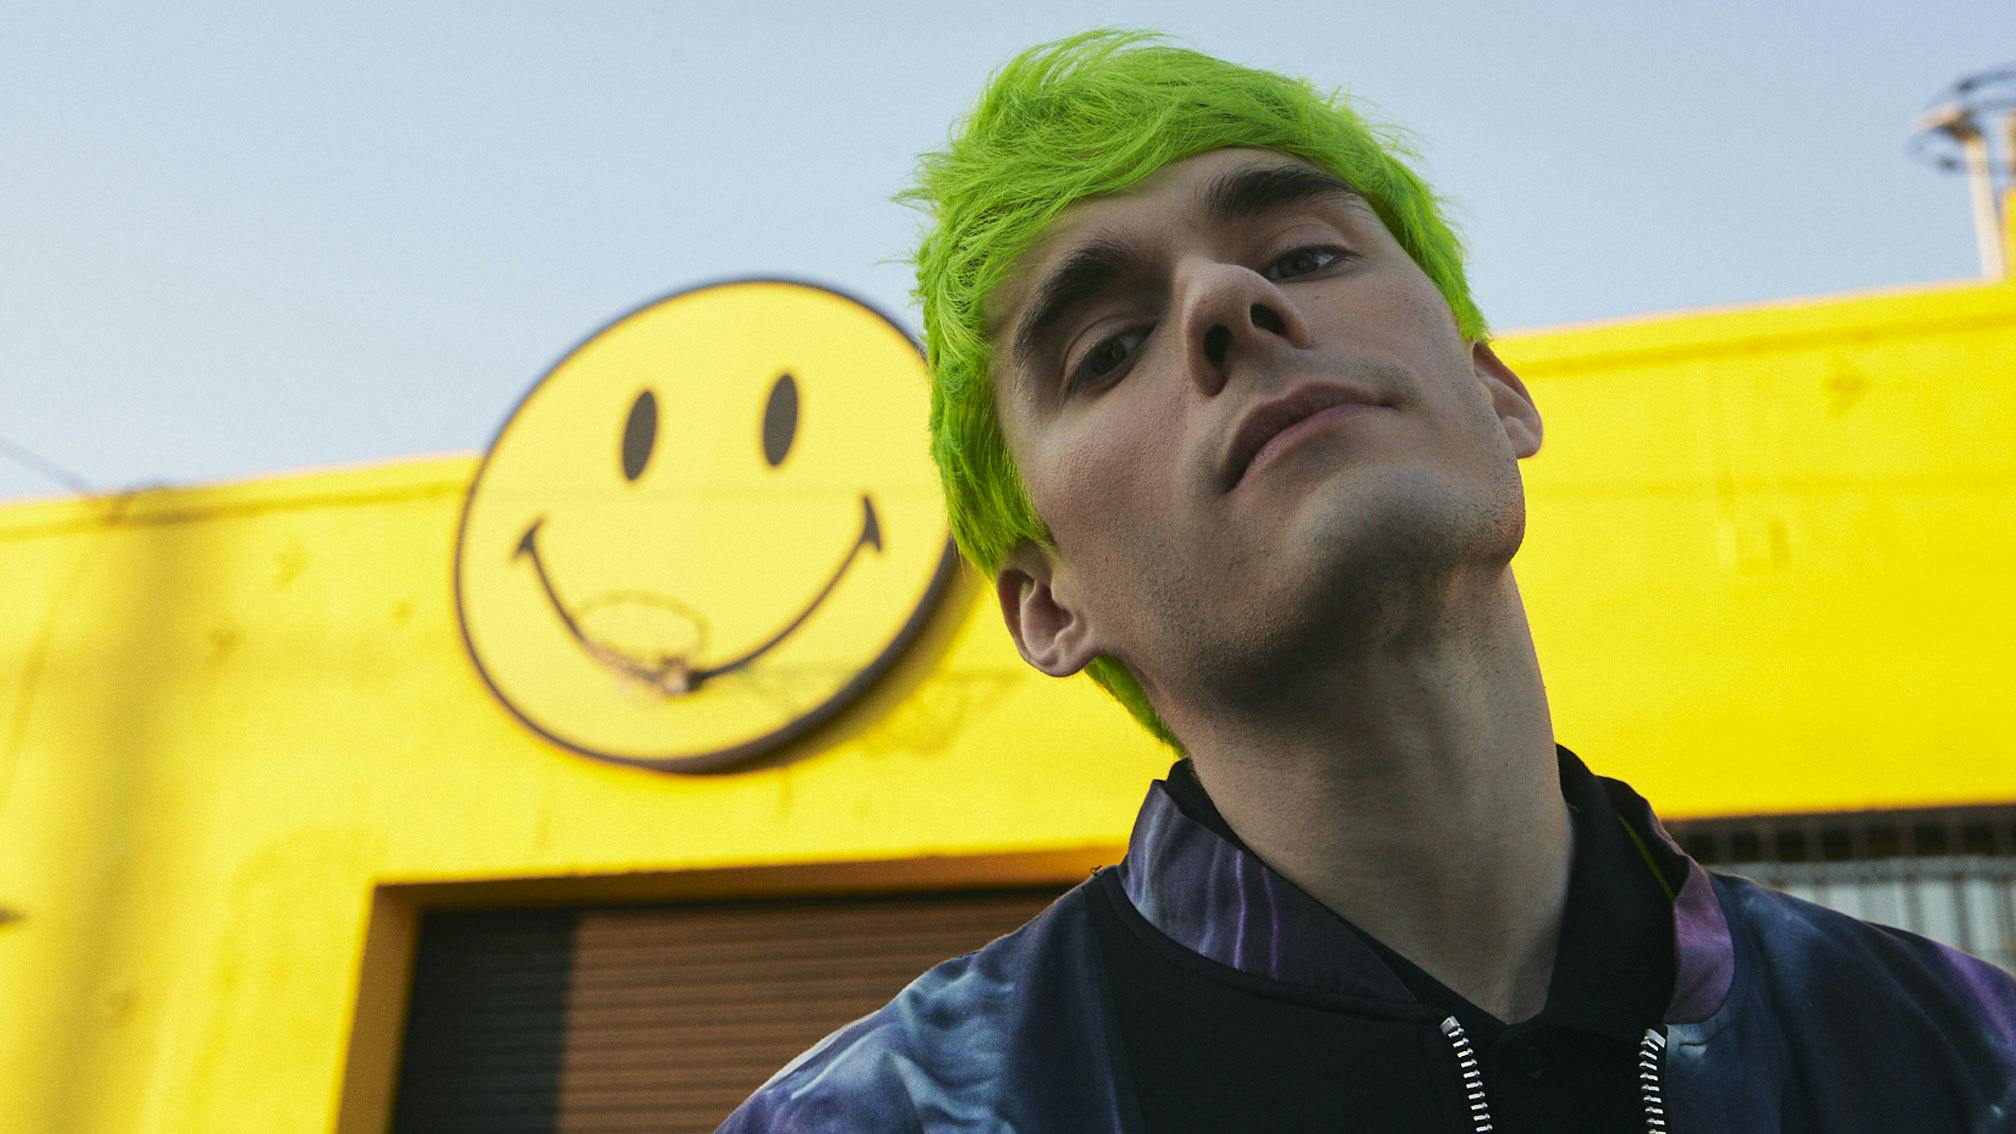 Fear, fame and FANDOM: Meet the real Awsten Knight